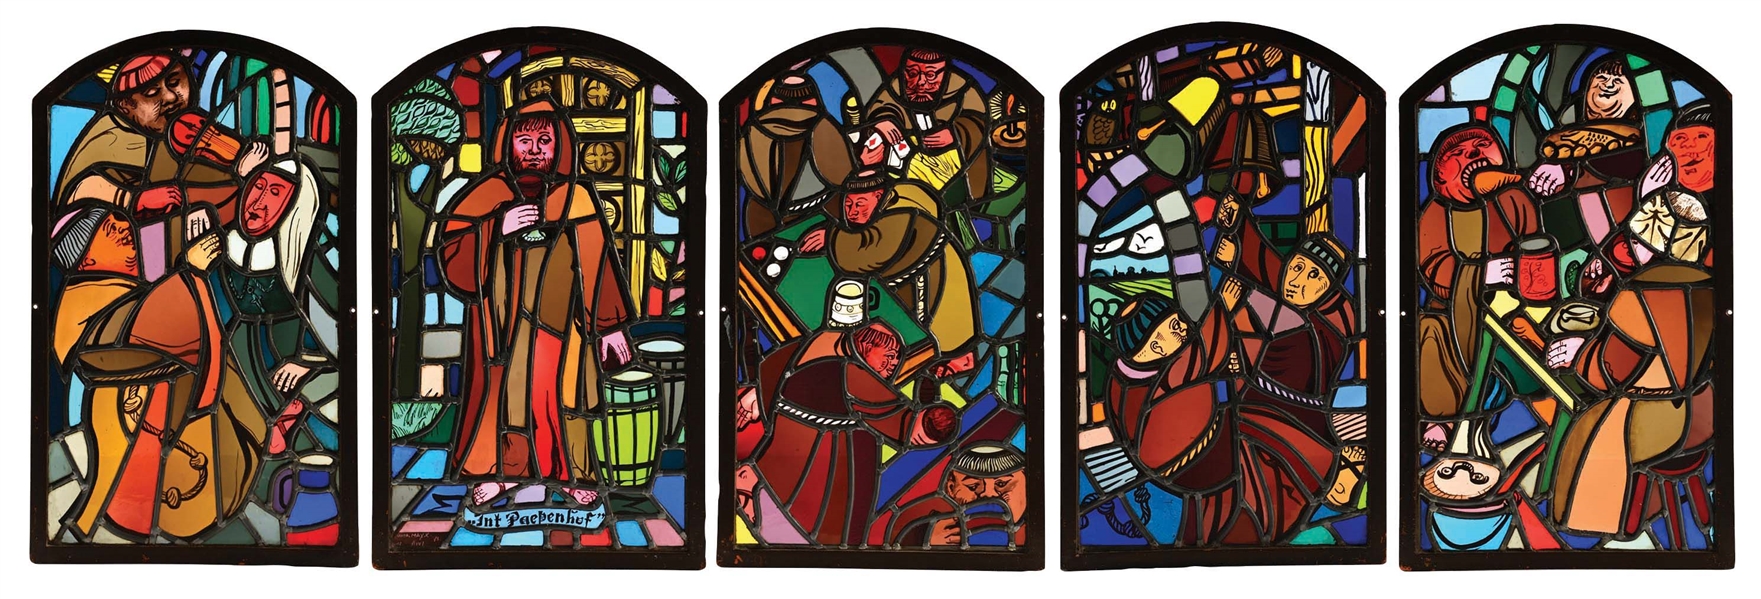 SET OF 5 STAINED GLASS WINDOWS.